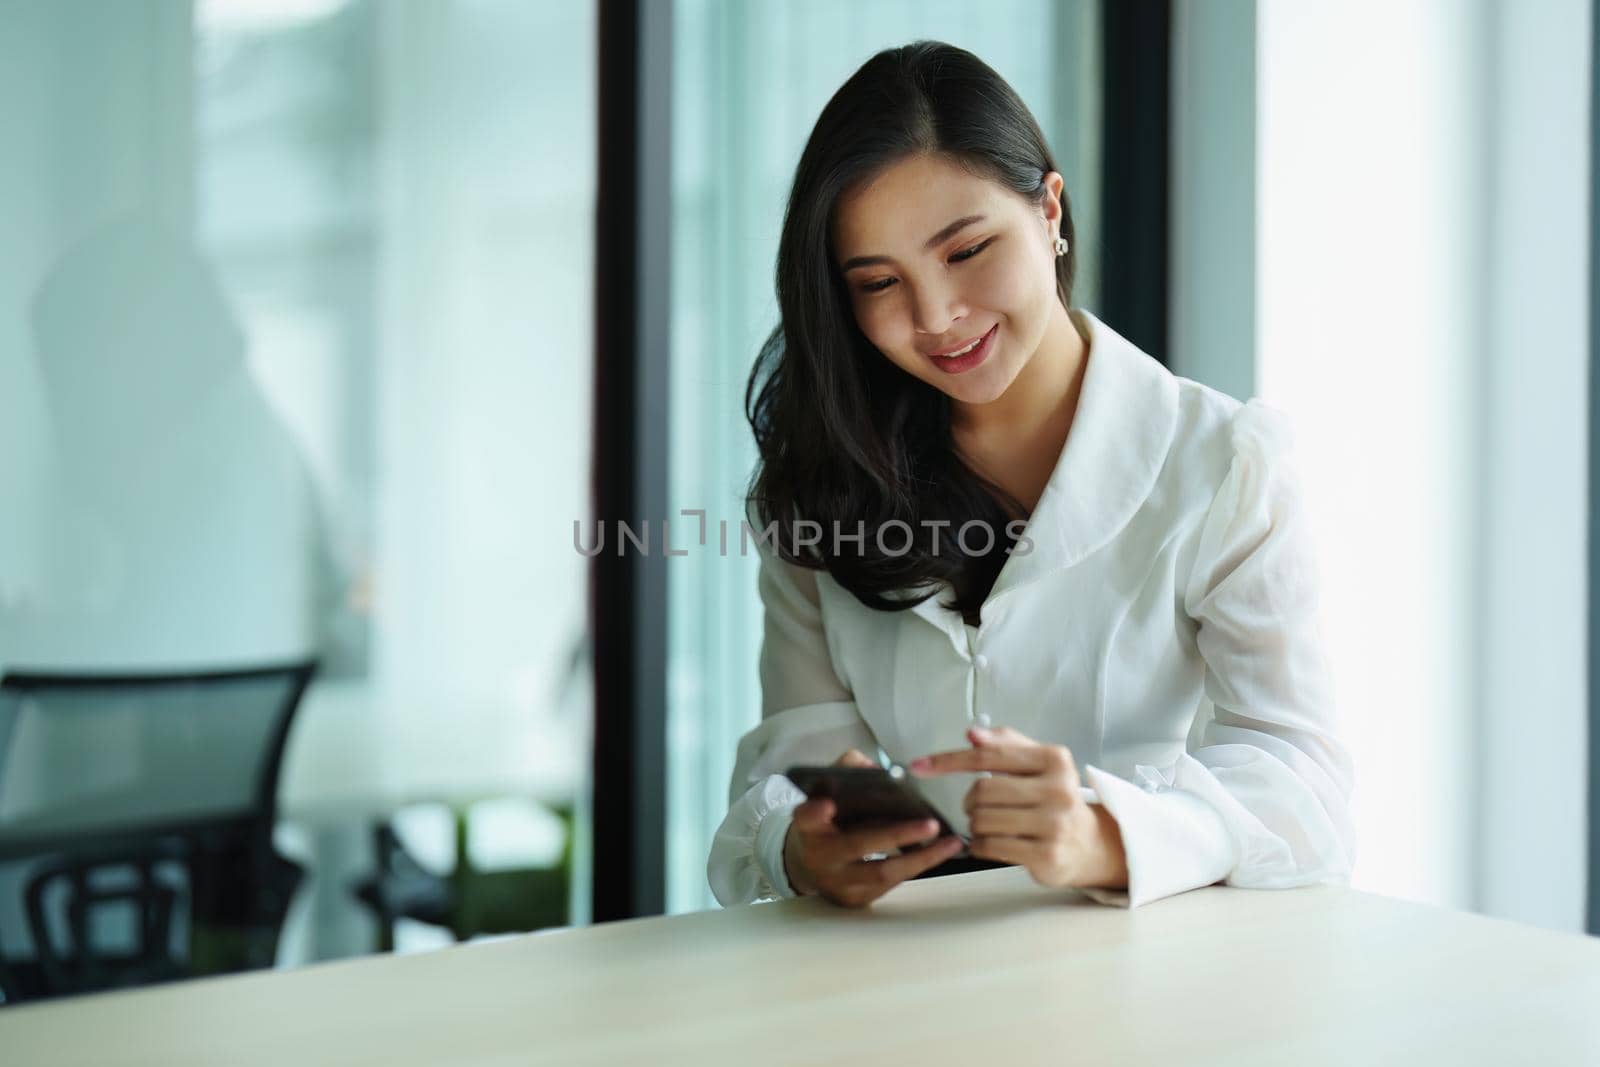 Portrait of a young Asian woman sitting at a desk using her phone.